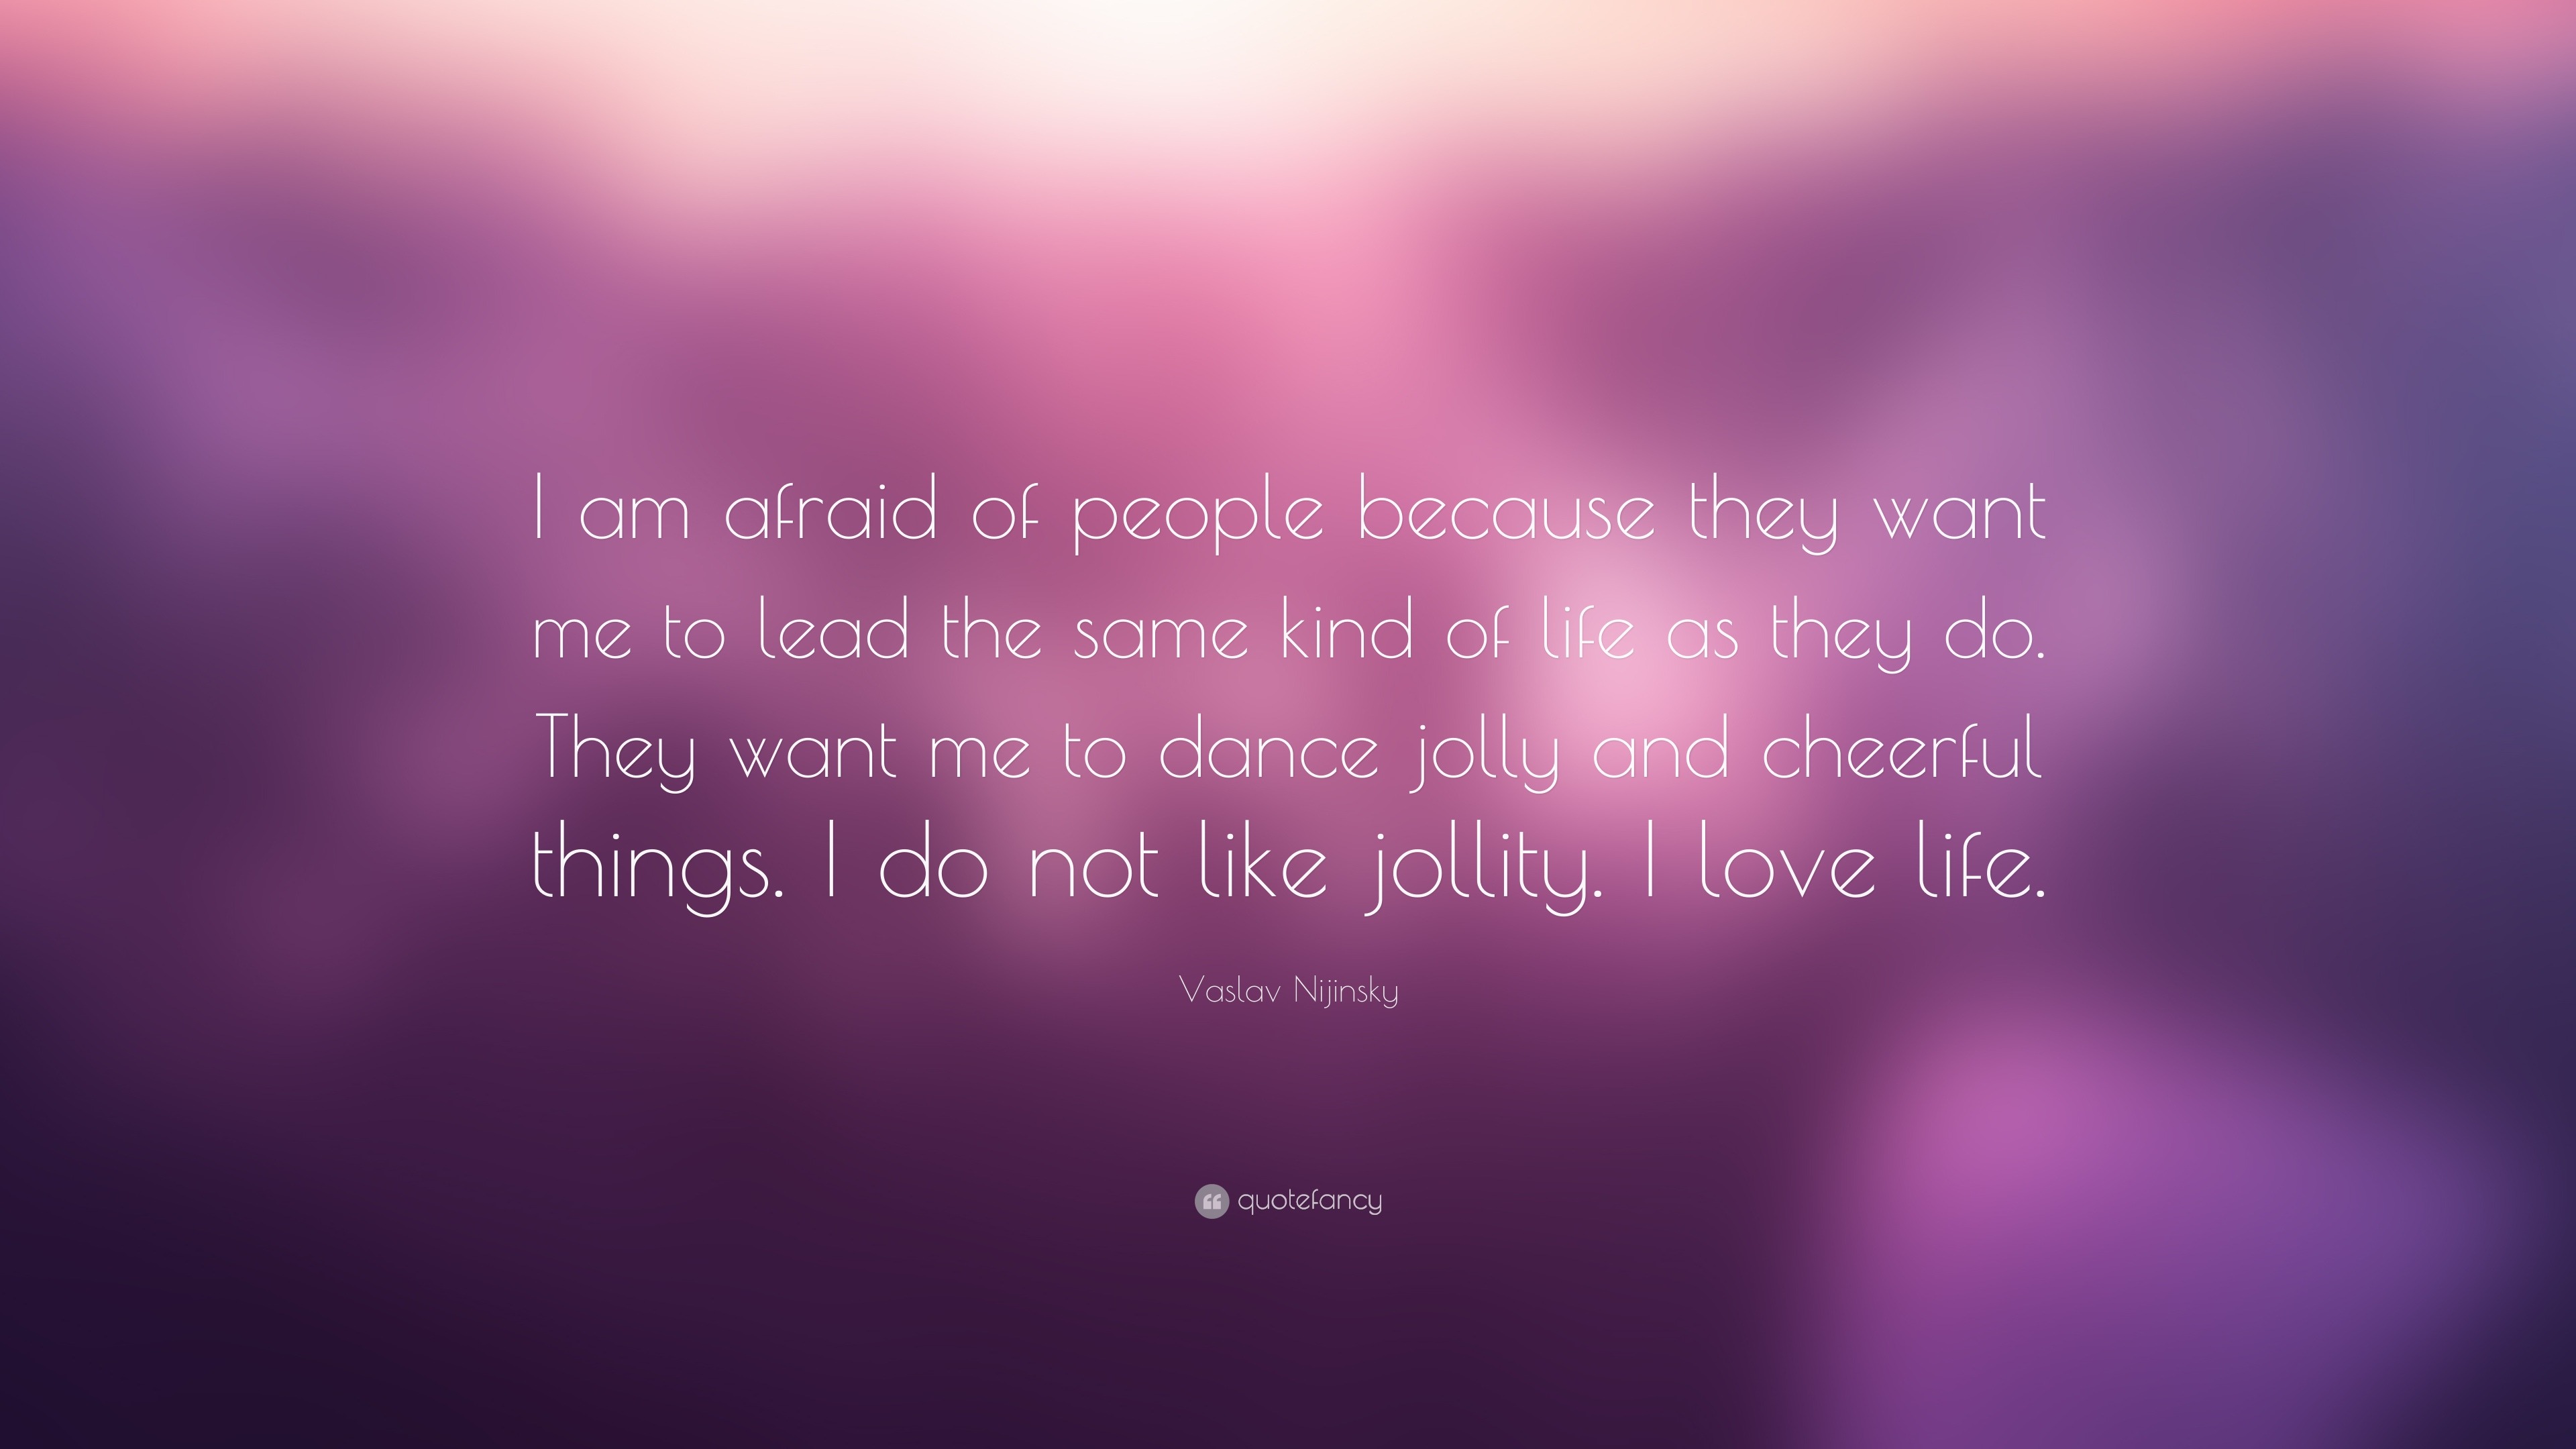 Vaslav Nijinsky Quote: “I am afraid of people because they want me to ...